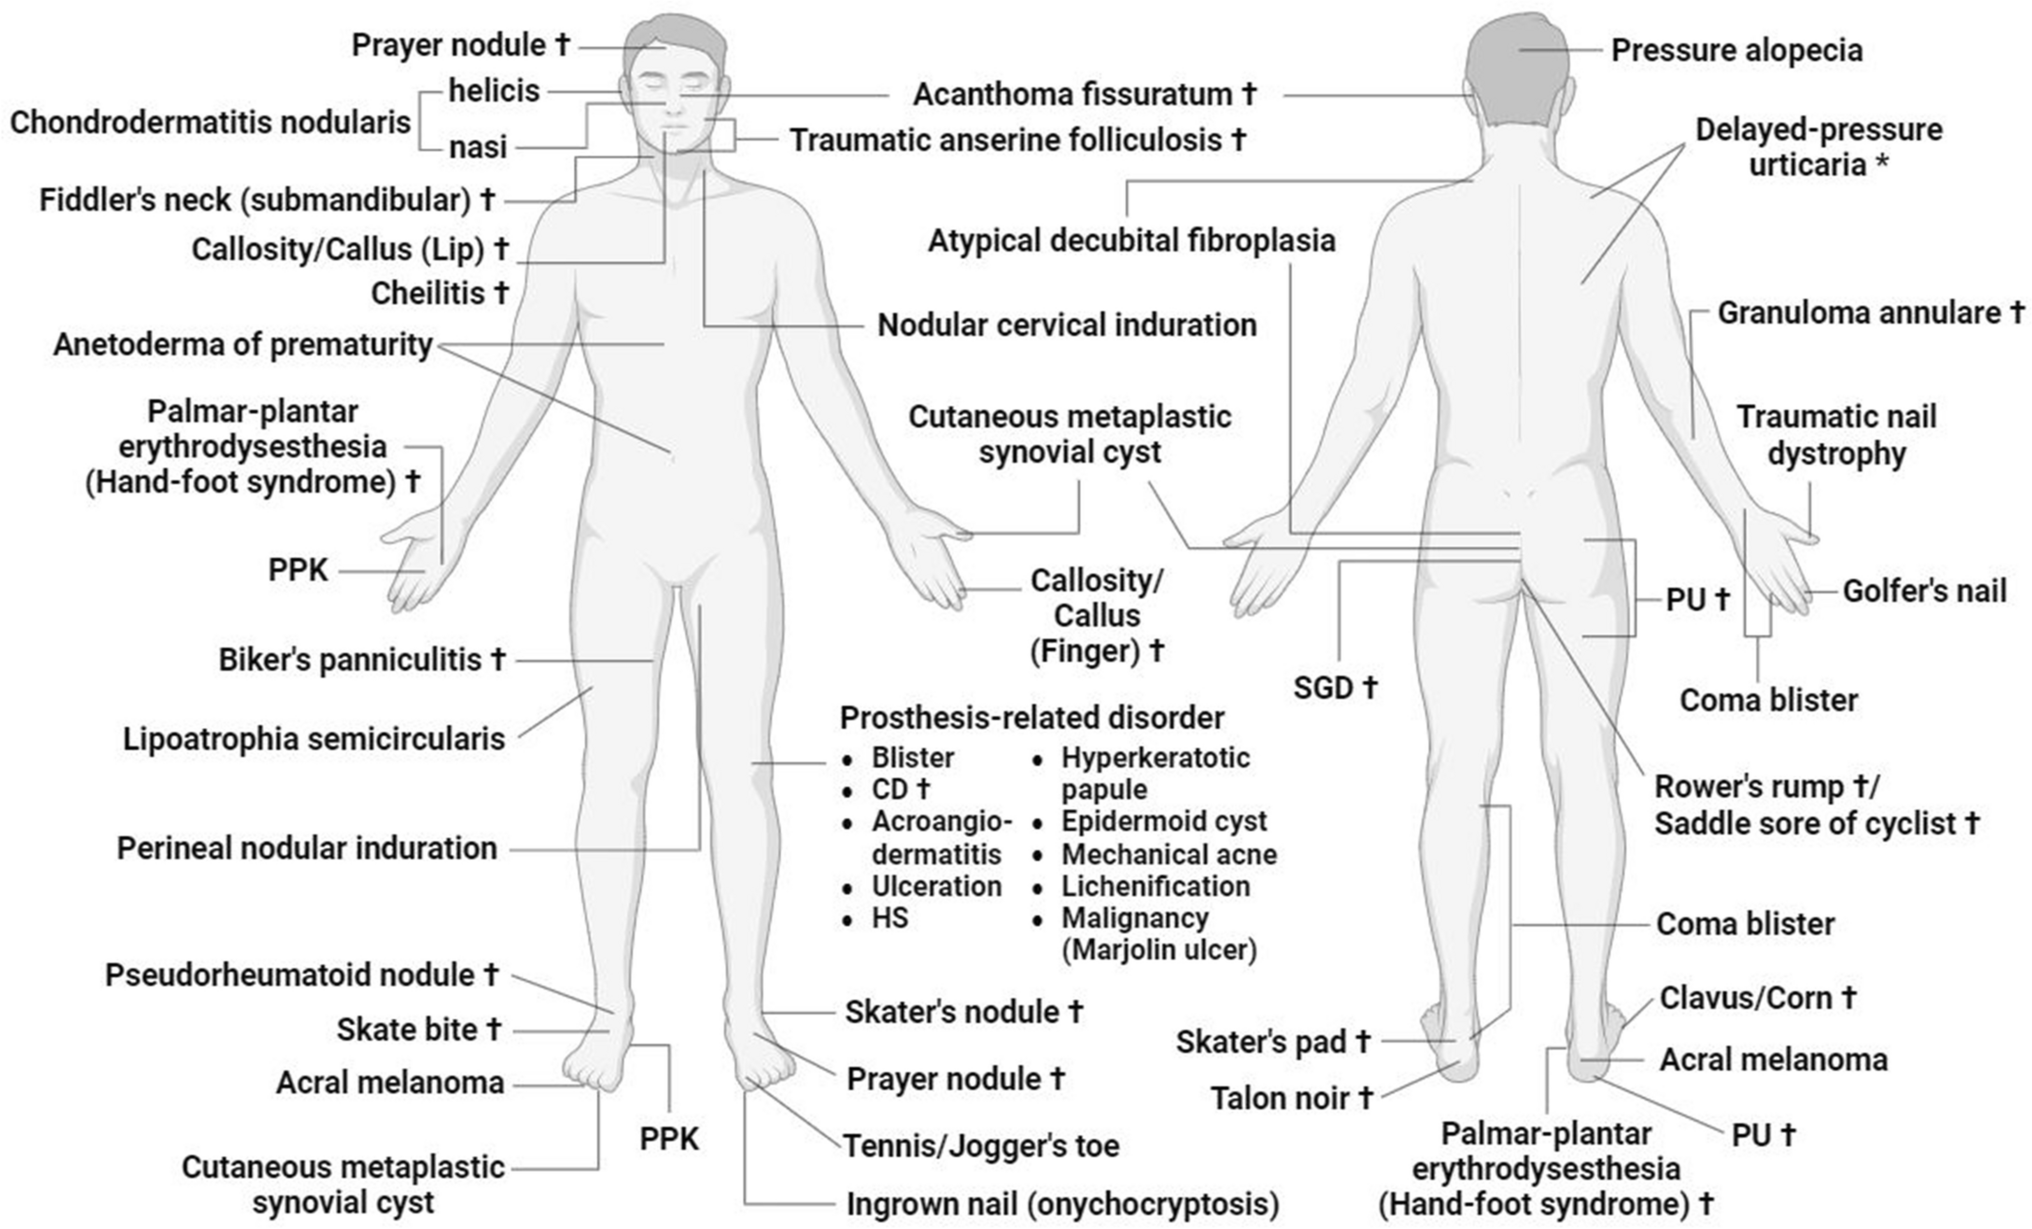 Pressure and Skin: A Review of Disease Entities Driven or Influenced by Mechanical Pressure